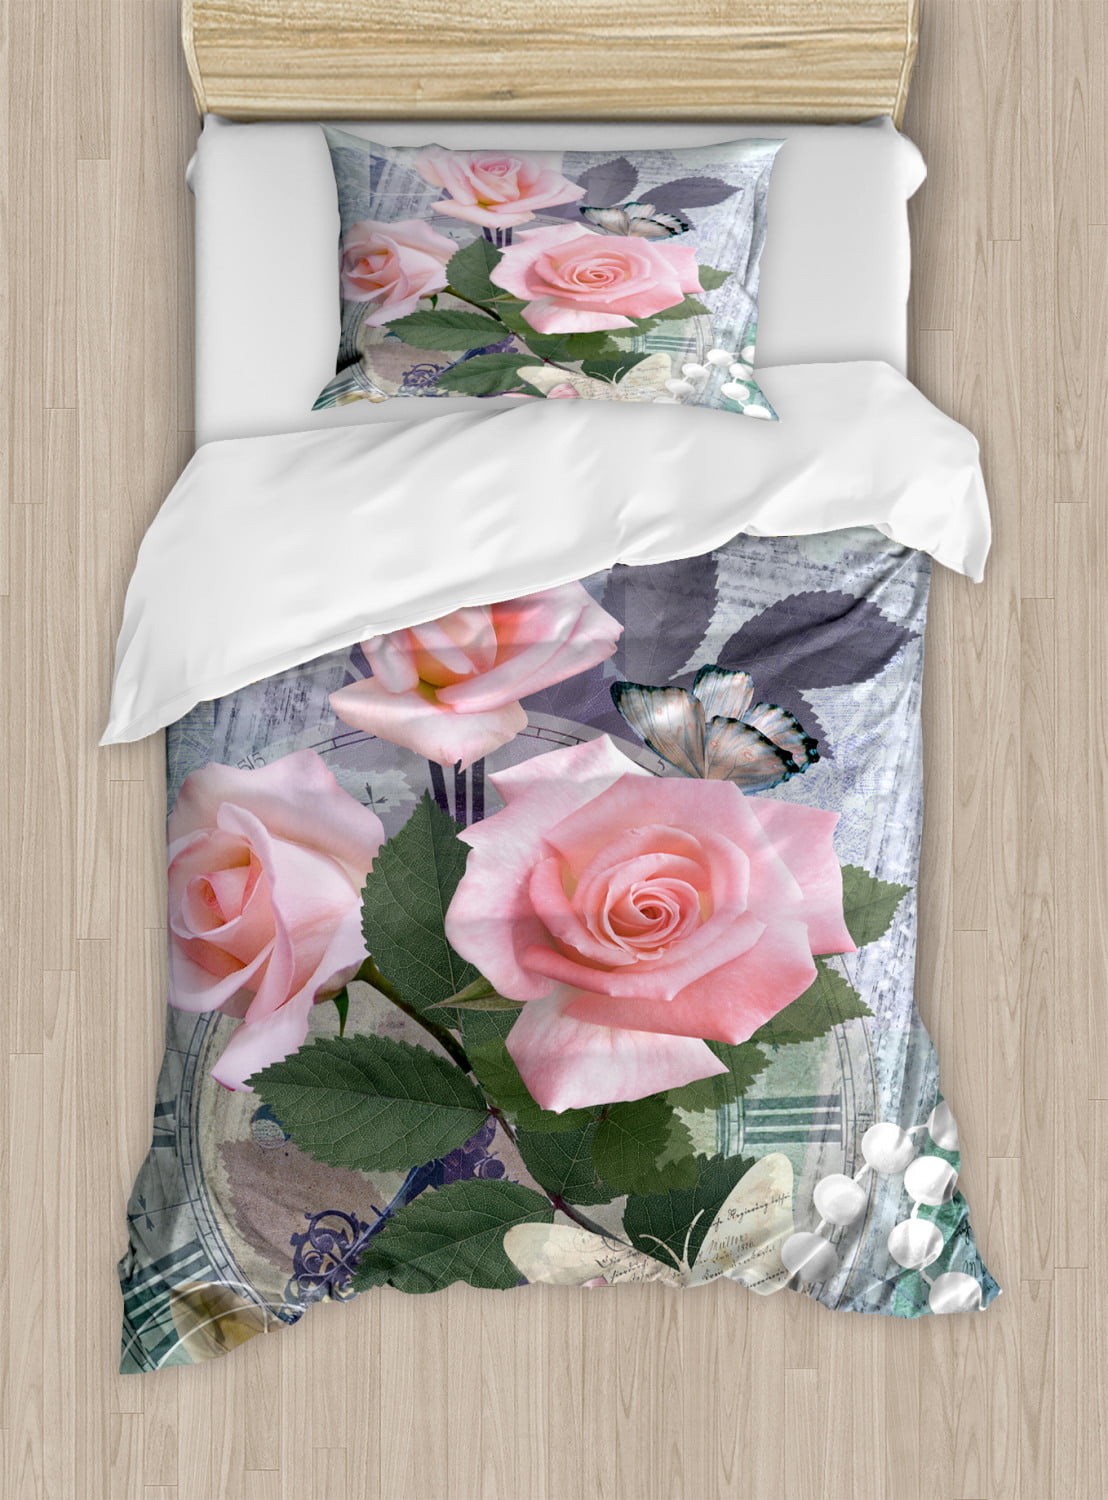 Pearls Twin Size Duvet Cover Set, Classic Rose and Pearls Romantic ...